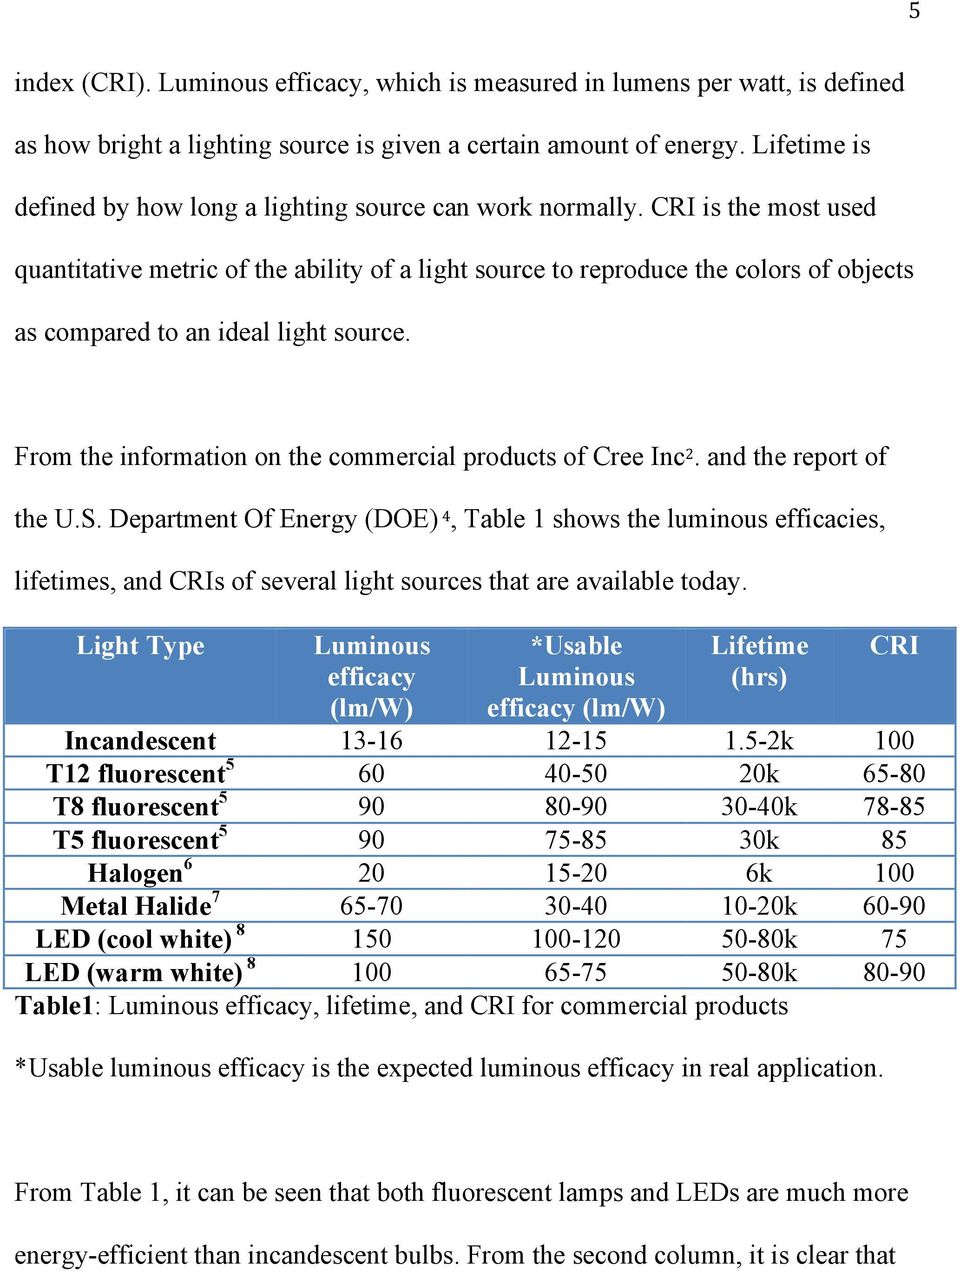 CRI is the most used quantitative metric of the ability of a light source to reproduce the colors of objects as compared to an ideal light source.